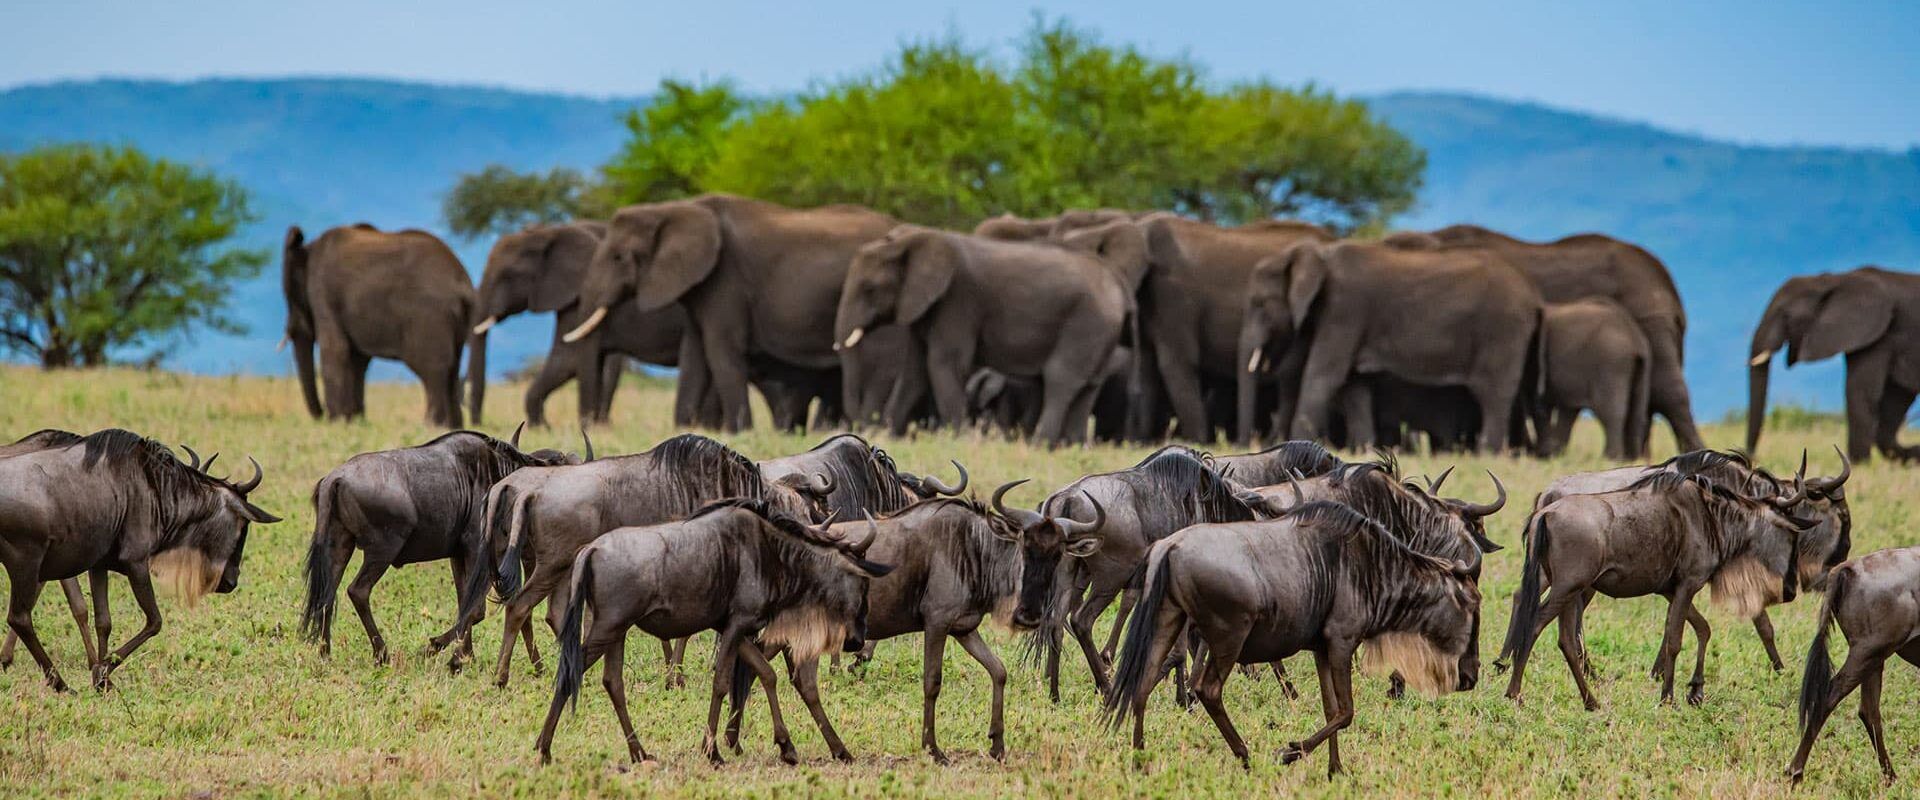 A herd of wildbeest and in front of a group of elephants on grass plains in Tanzania